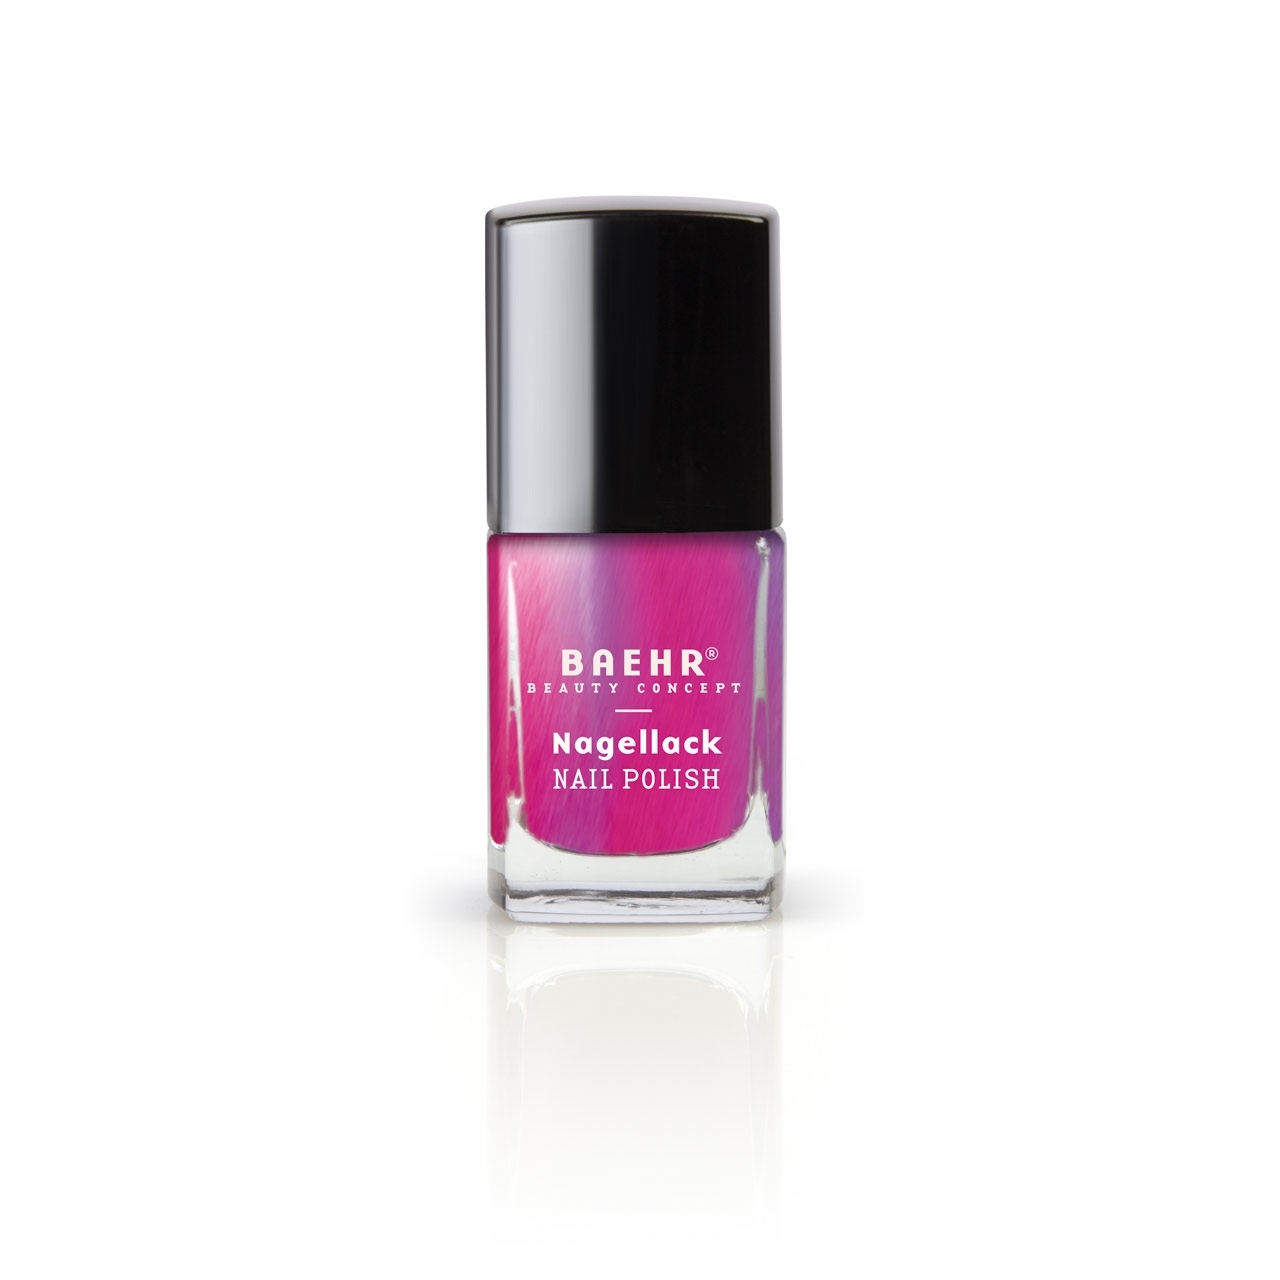 BAEHR BEAUTY CONCEPT - NAILS Nagellack candy pink flipflop 11 ml